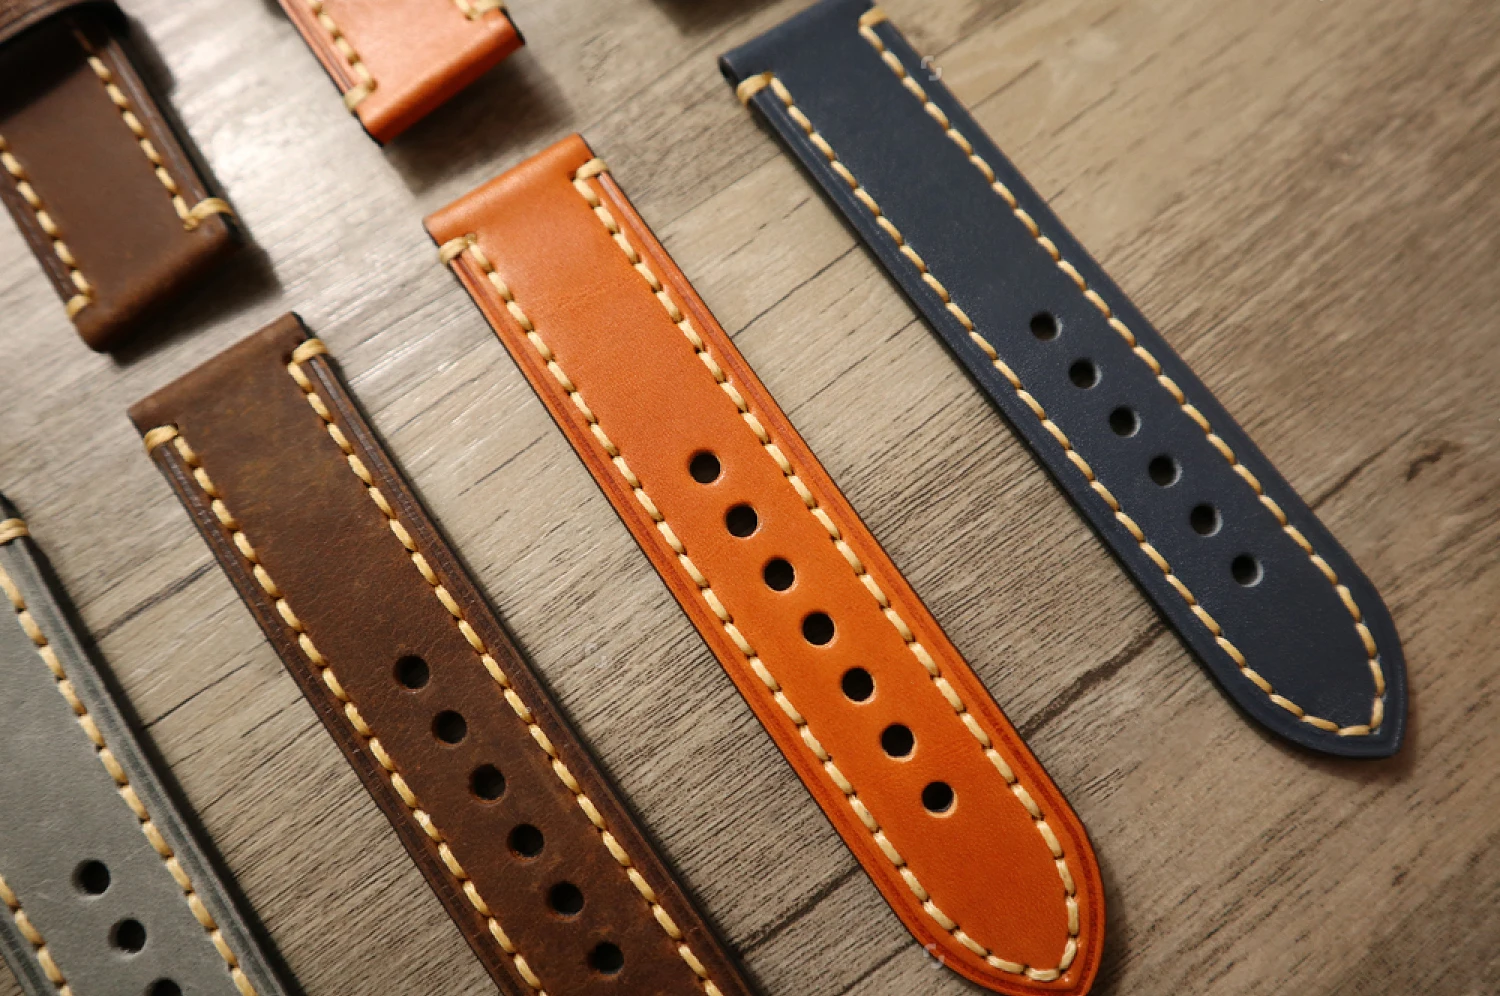 leather watch band strap compatible with all model GA110SKE-8A GA110RG-1A GA201-1A GA110-1B GA100-1A1 GA100-1A4 GA110GB-1A enlarge